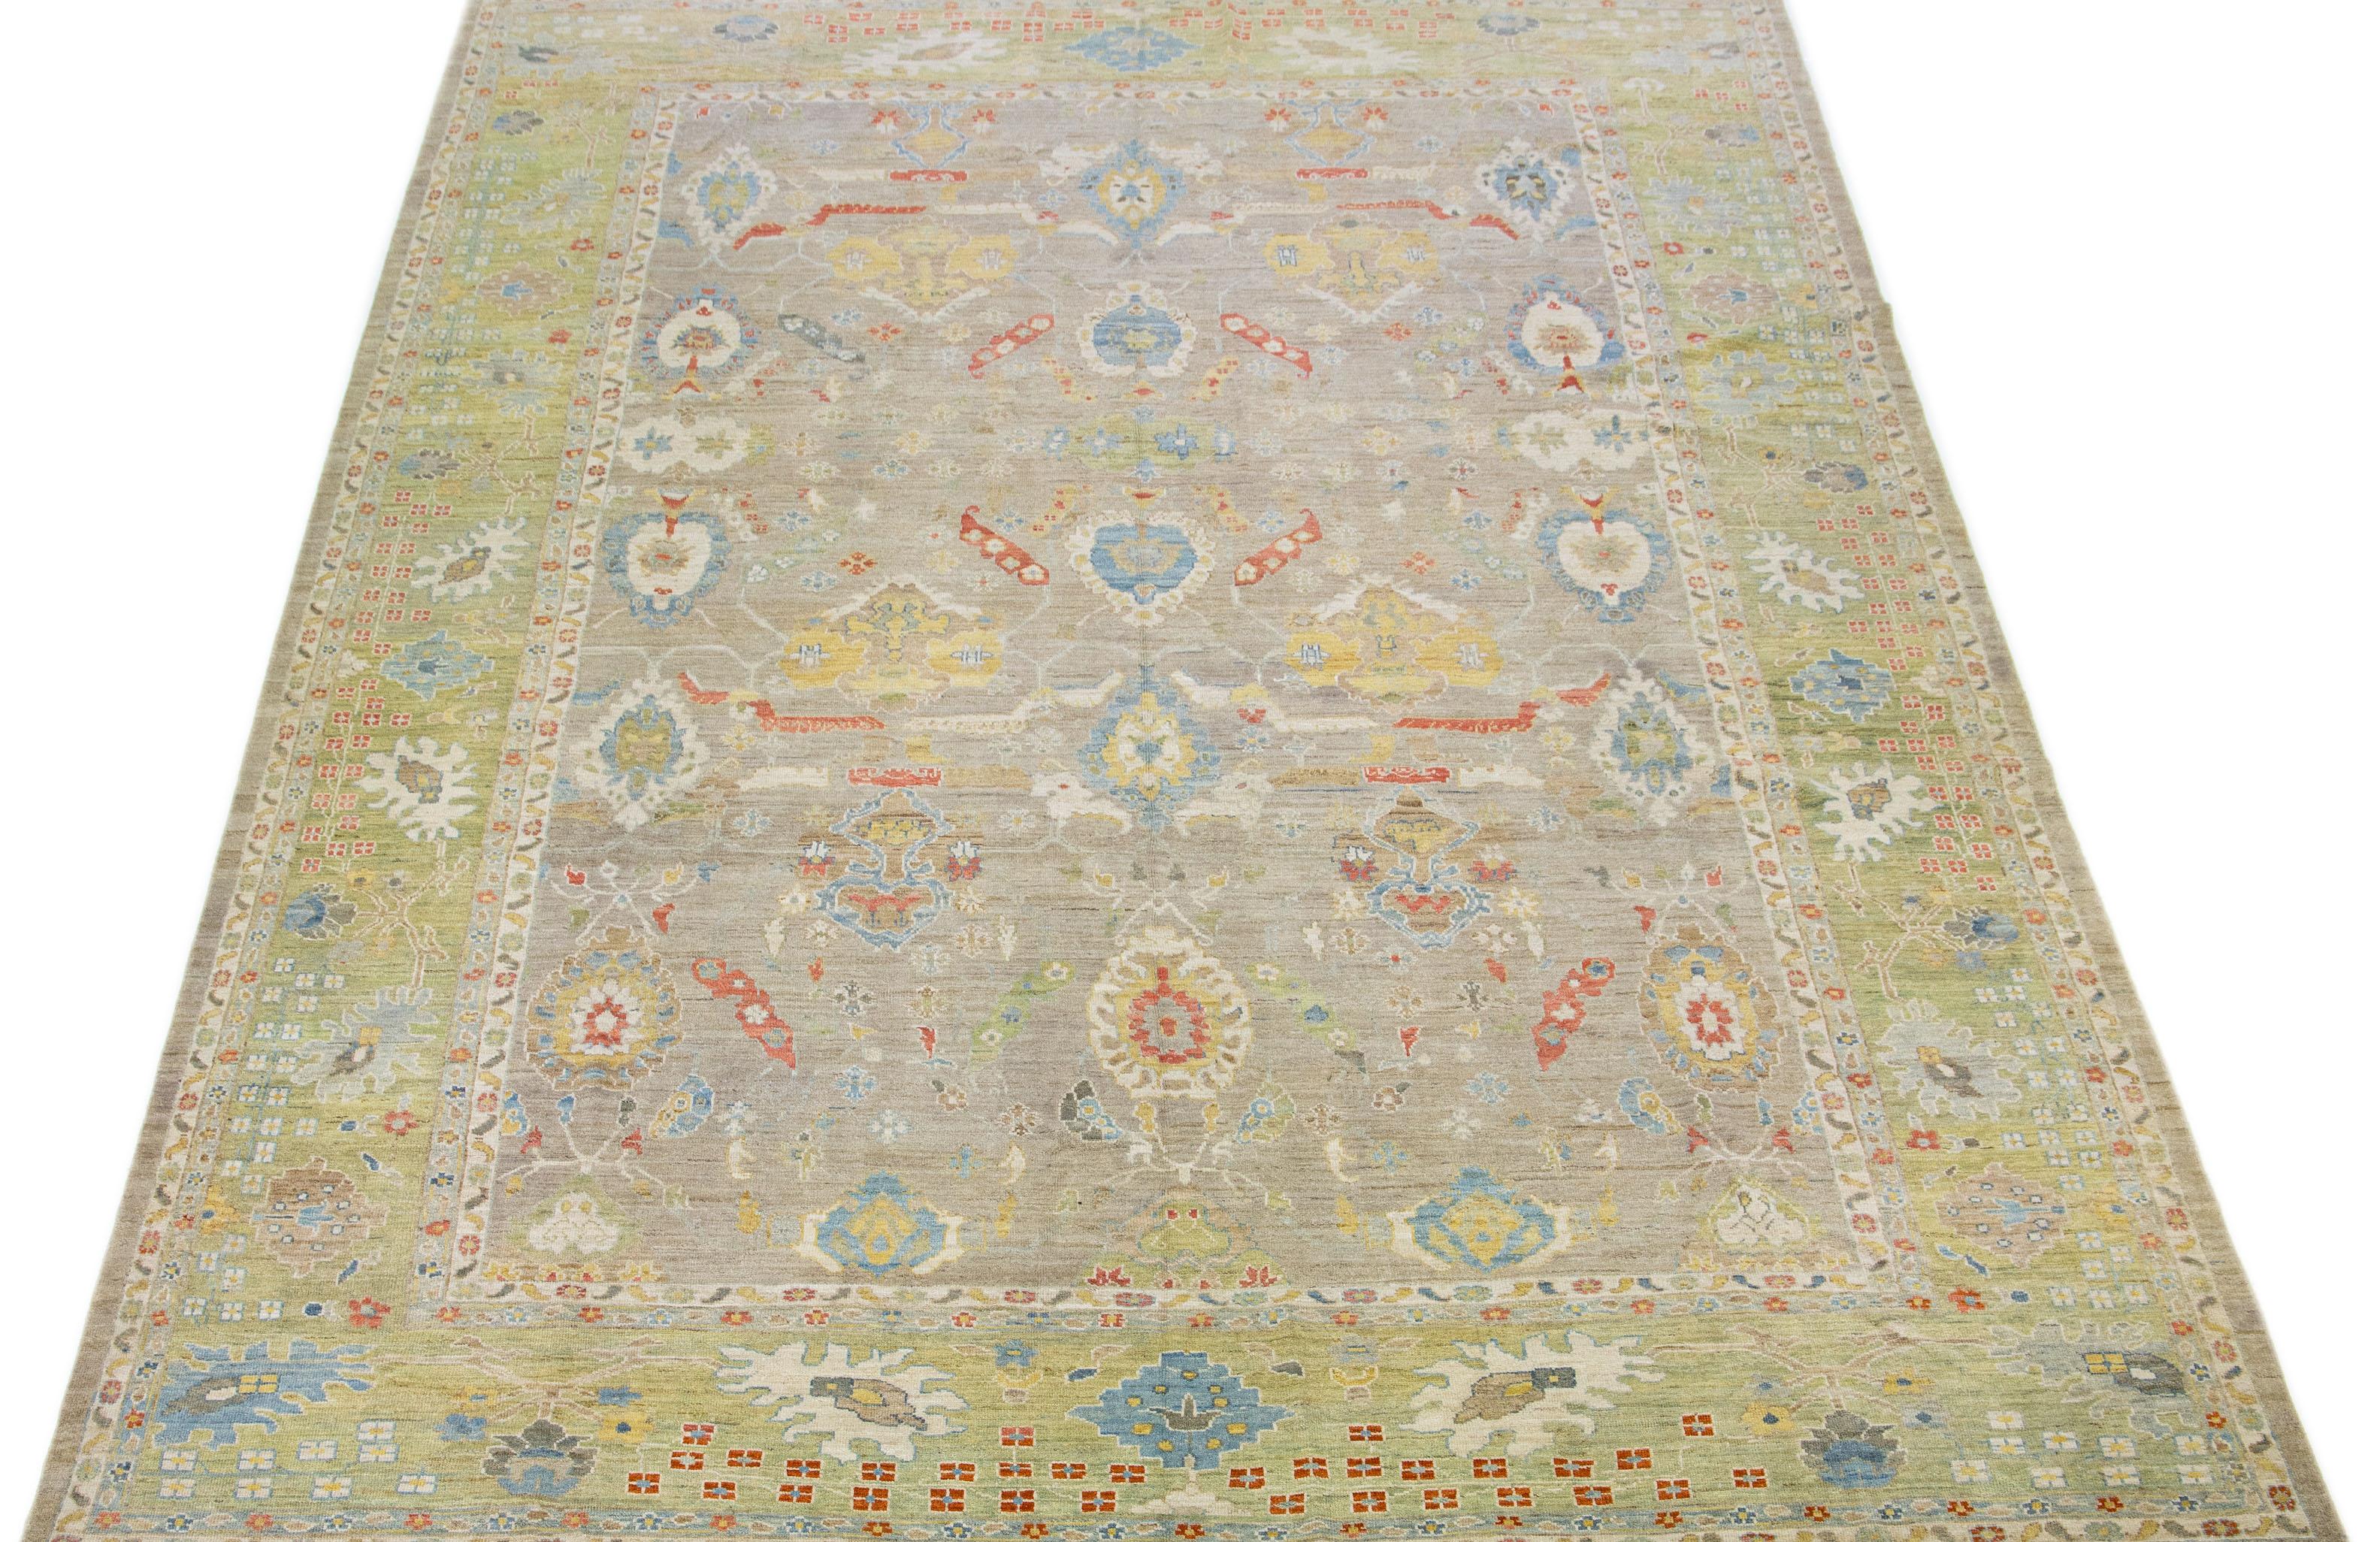 This contemporary take on the traditional Sultanabad style is showcased in an exquisite hand-knotted wool rug with a striking beige color. An intricately designed frame accentuates its all-over floral motif, adorned with multicolored accents that